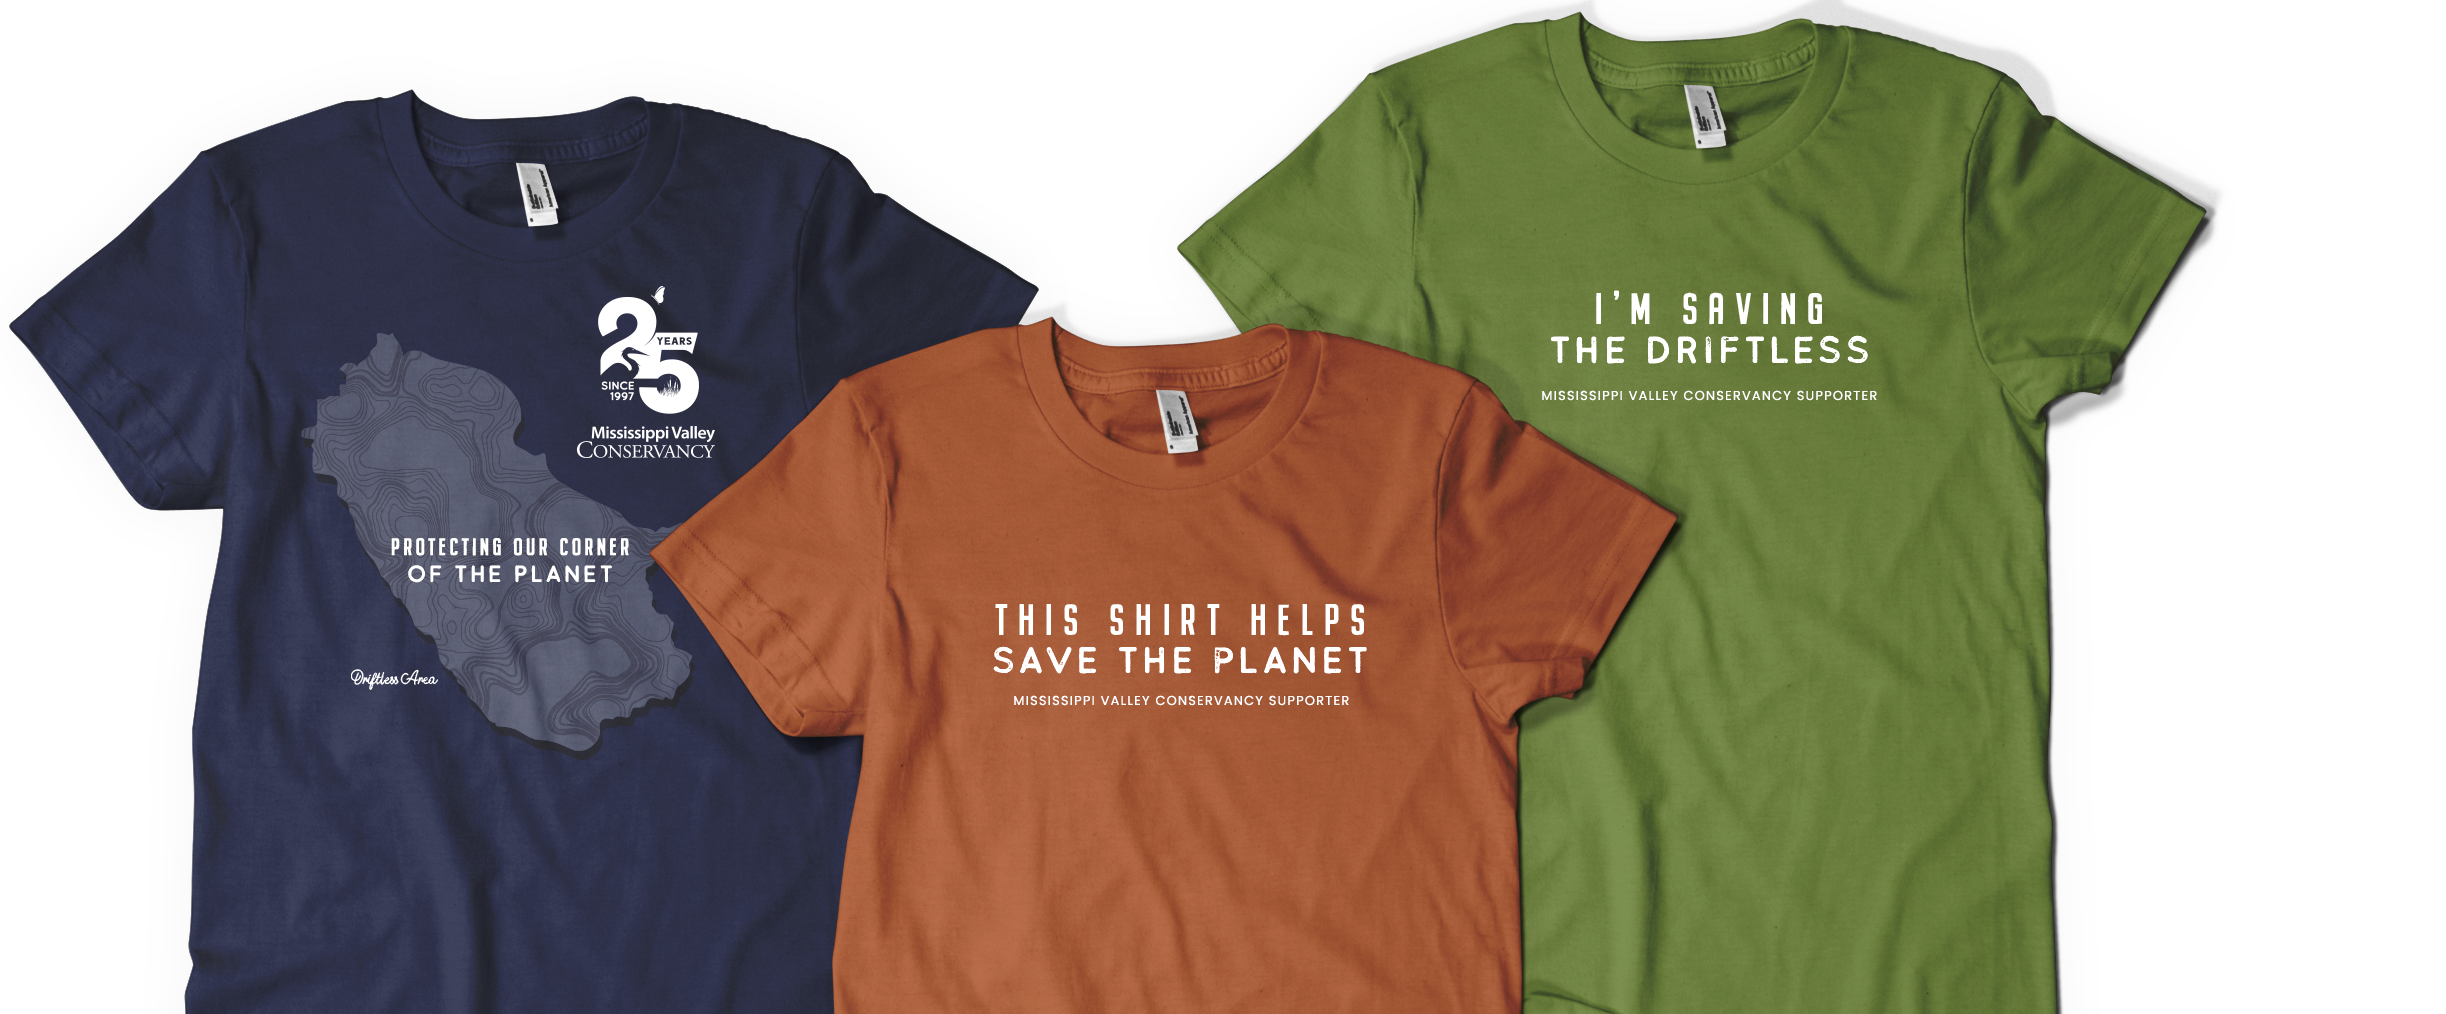 Three Mississippi Valley Conservancy t-shirt designs created by Vendi Advertising